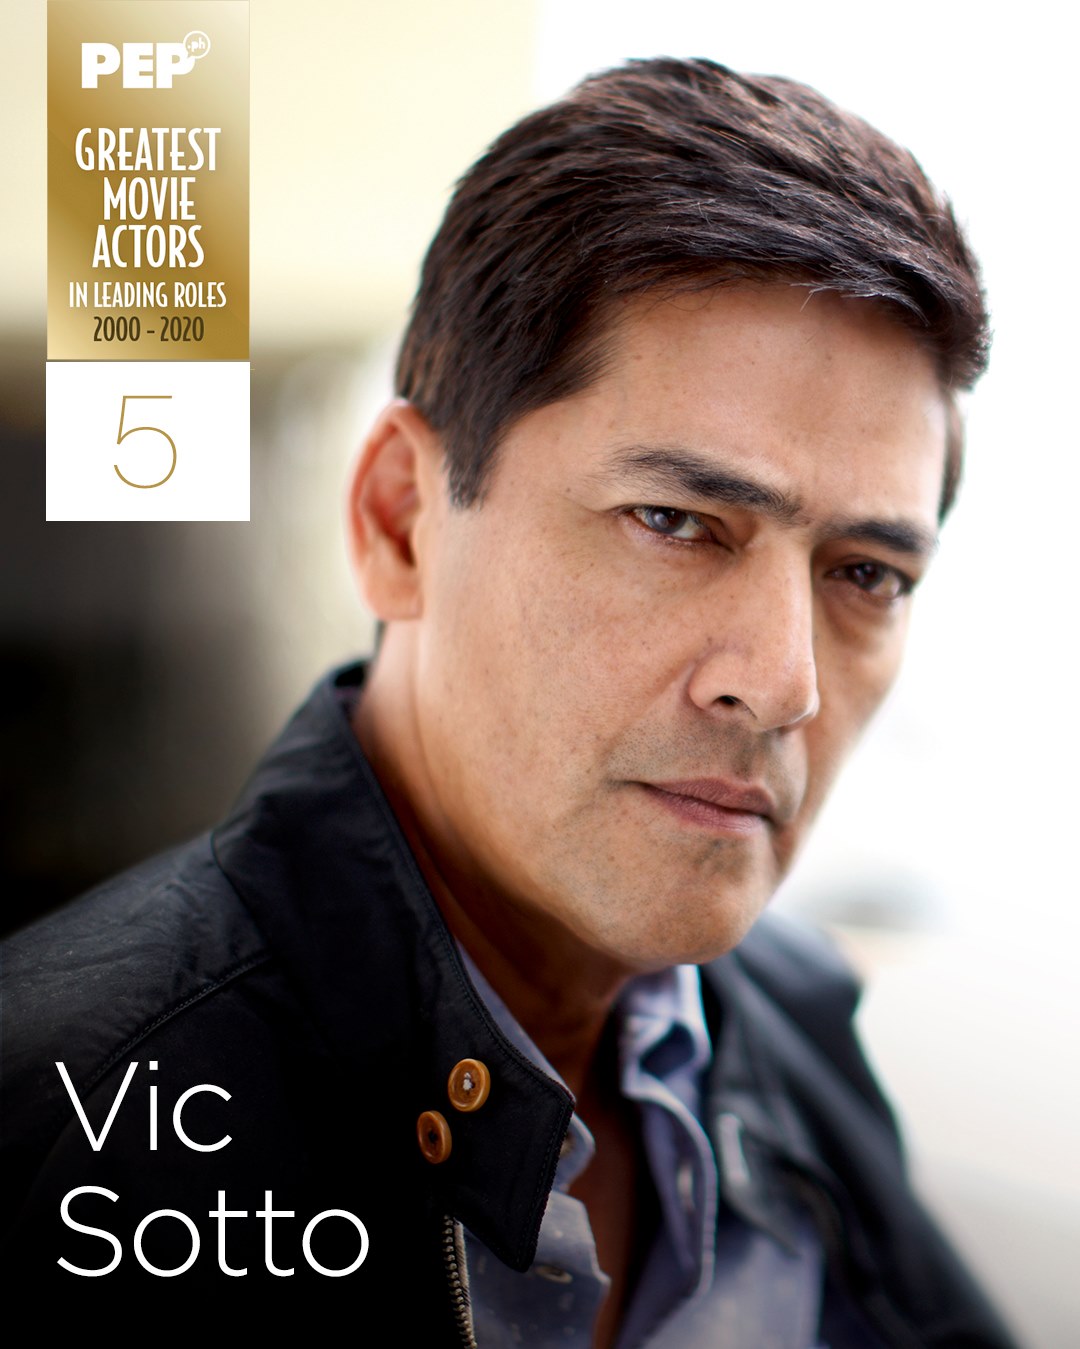 Vic Sotto, 15 Greatest Movie Actors in Leading Roles